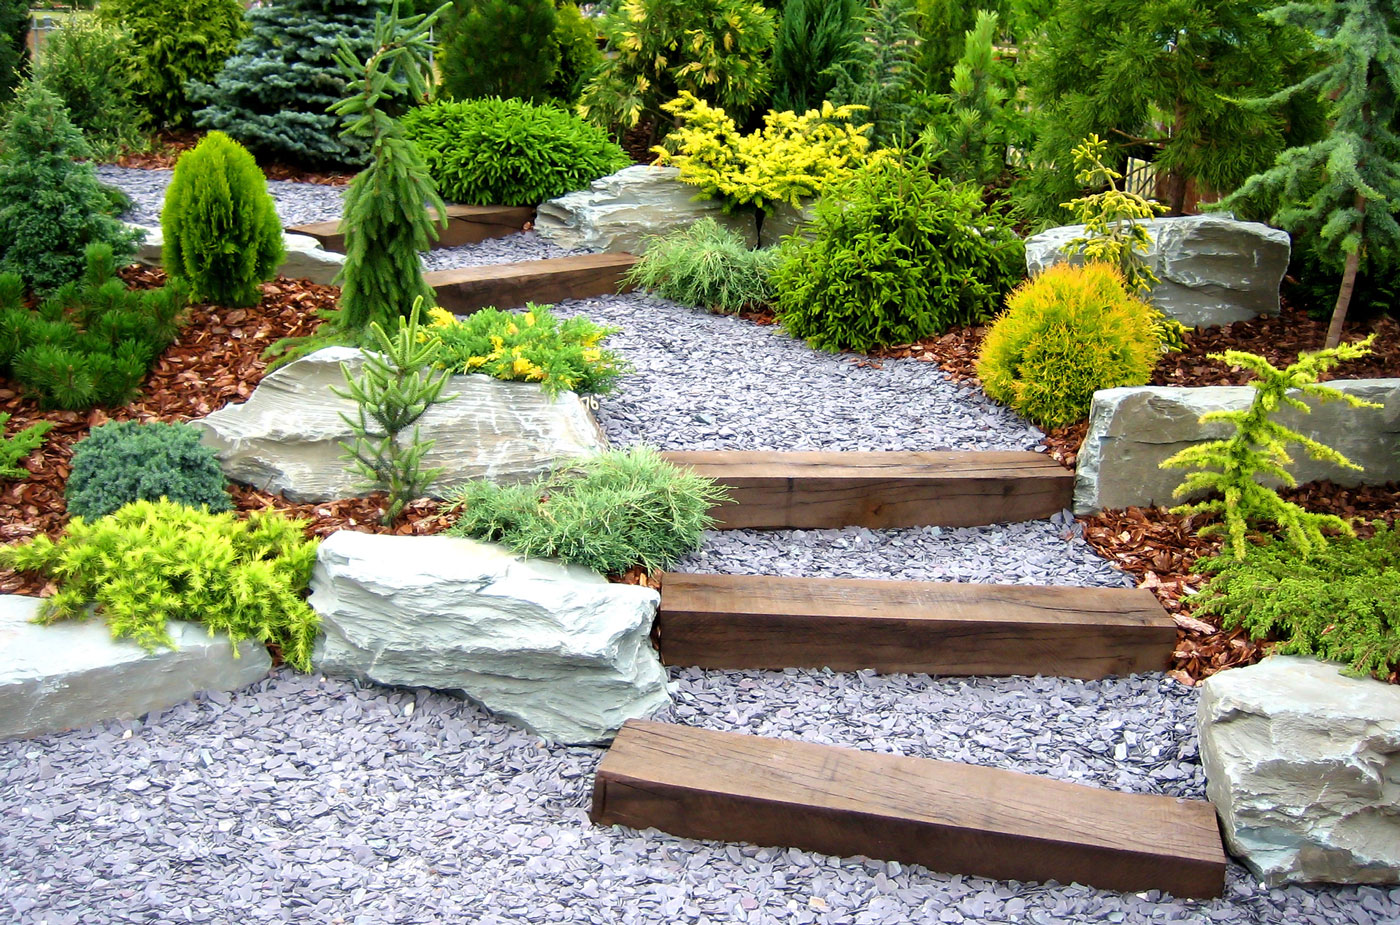 Landscaped garden path and steps